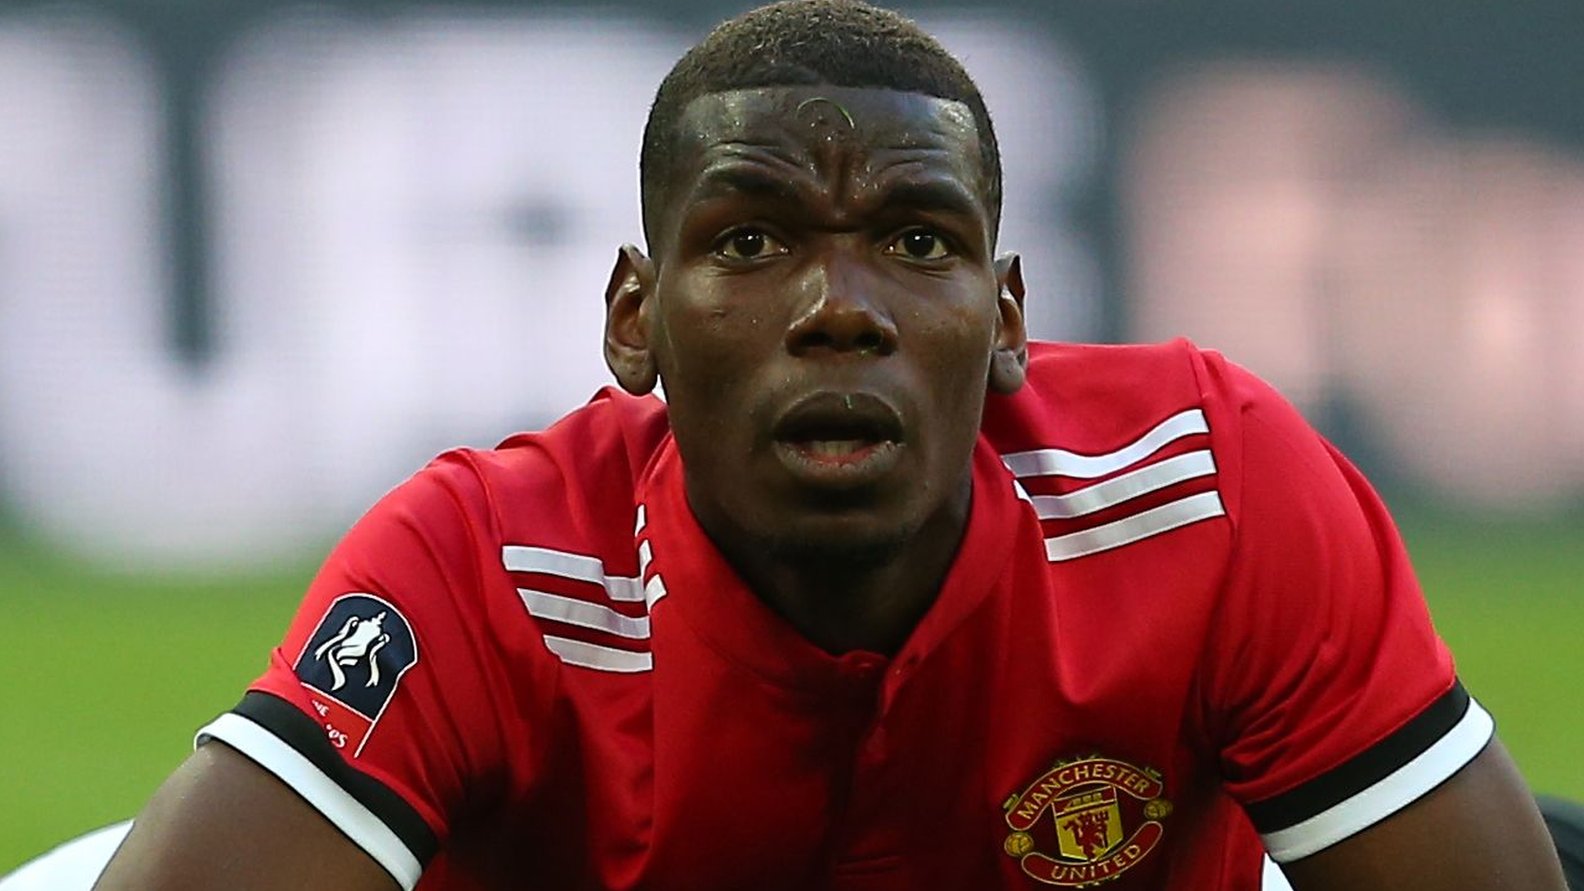 Pogba wants to leave Man Utd for Barca - Wednesday's gossip